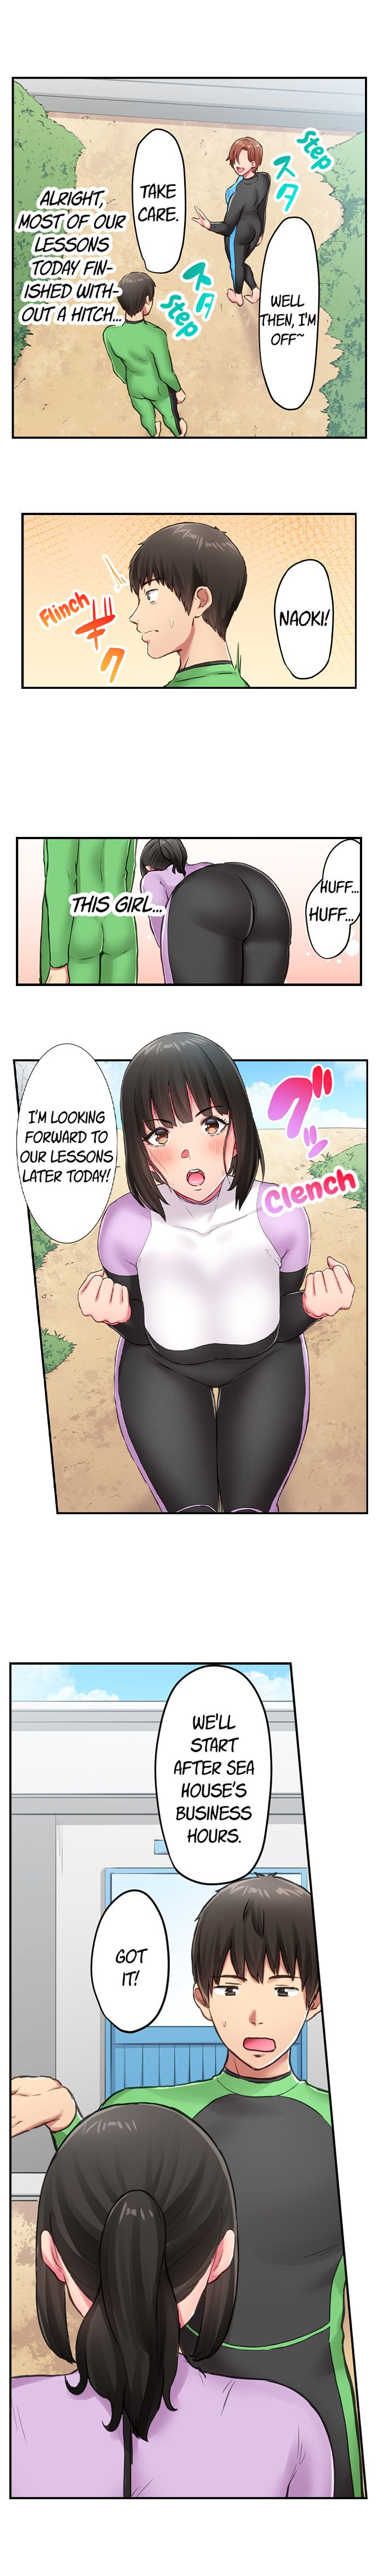 Blooming Summer Making Her Cum in Her Tight Wetsuit - Chapter 1 Page 3